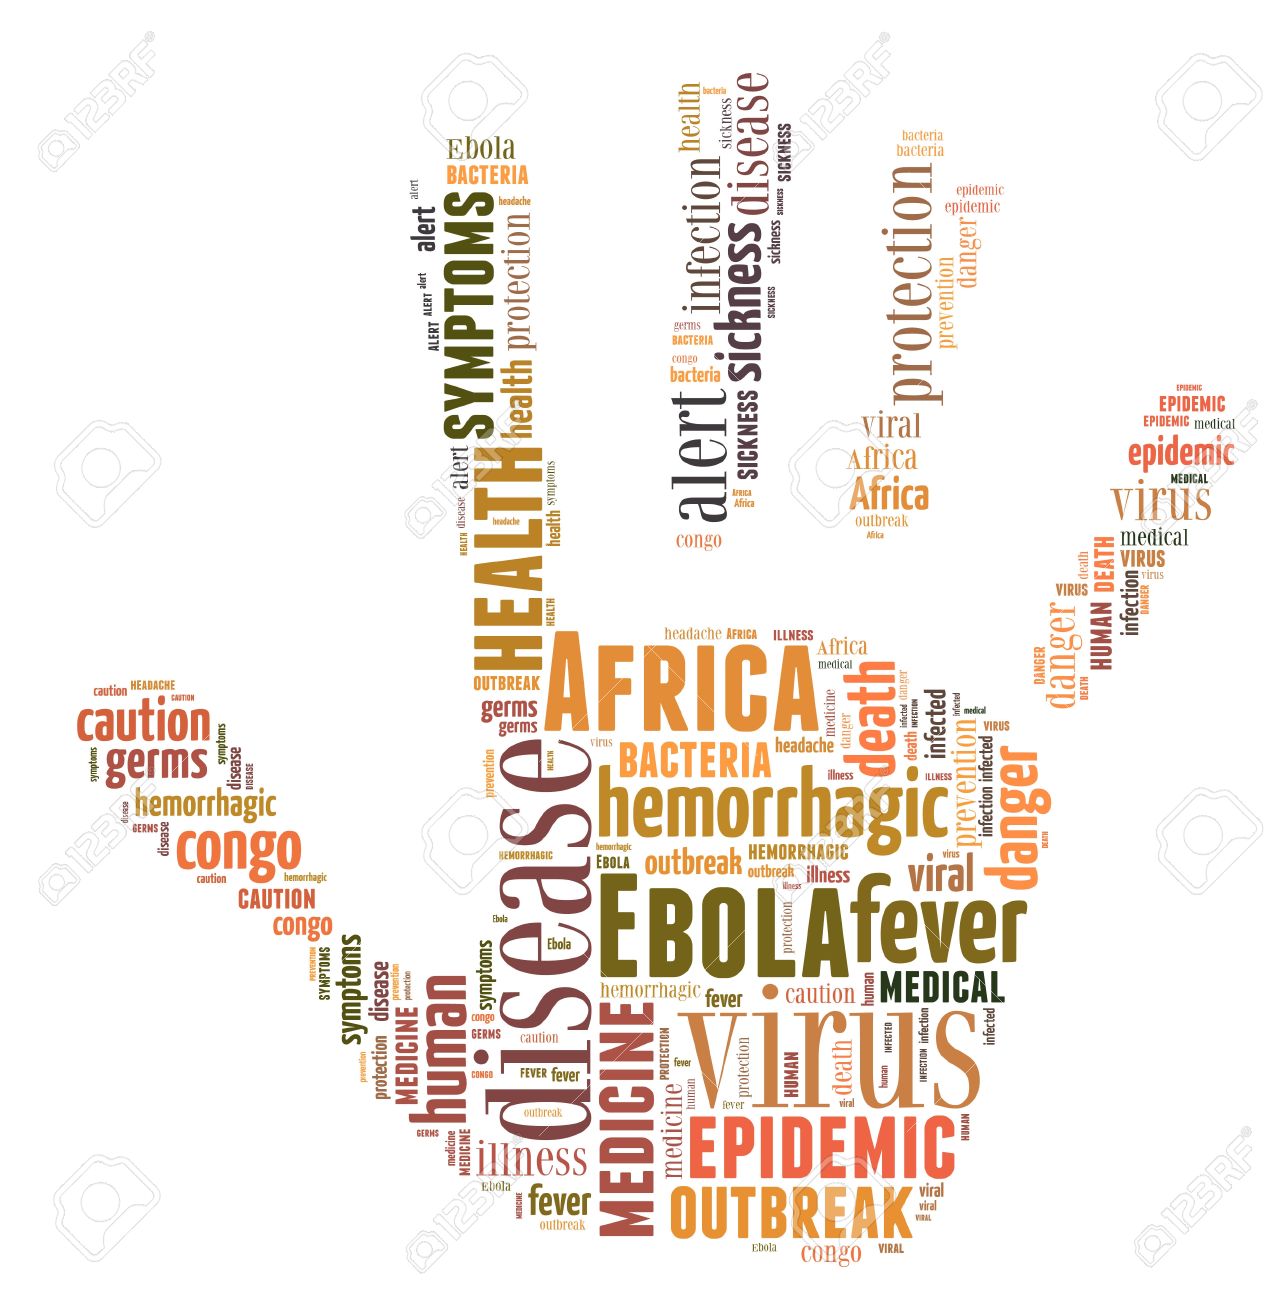 Words Cloud Illustration About The Spread Of Ebola In Africa Stock.